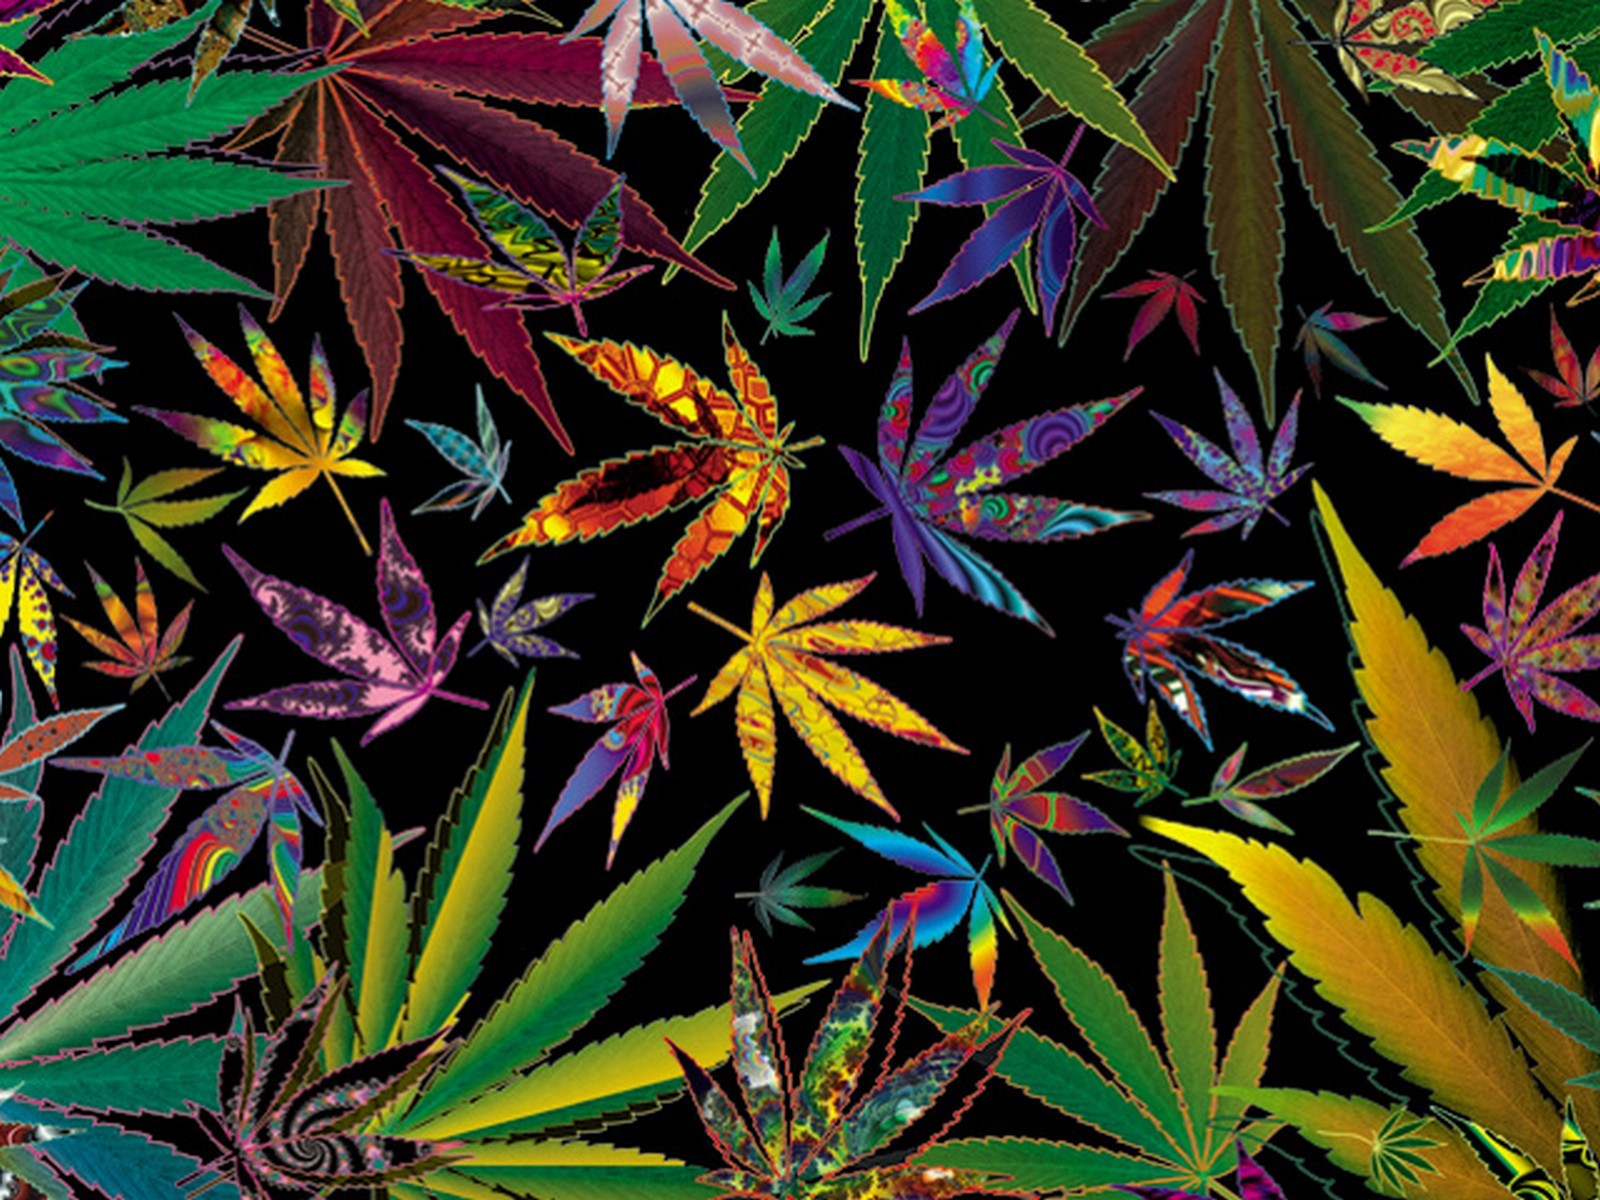 Gallery For Gt Trippy Weed Wallpaper